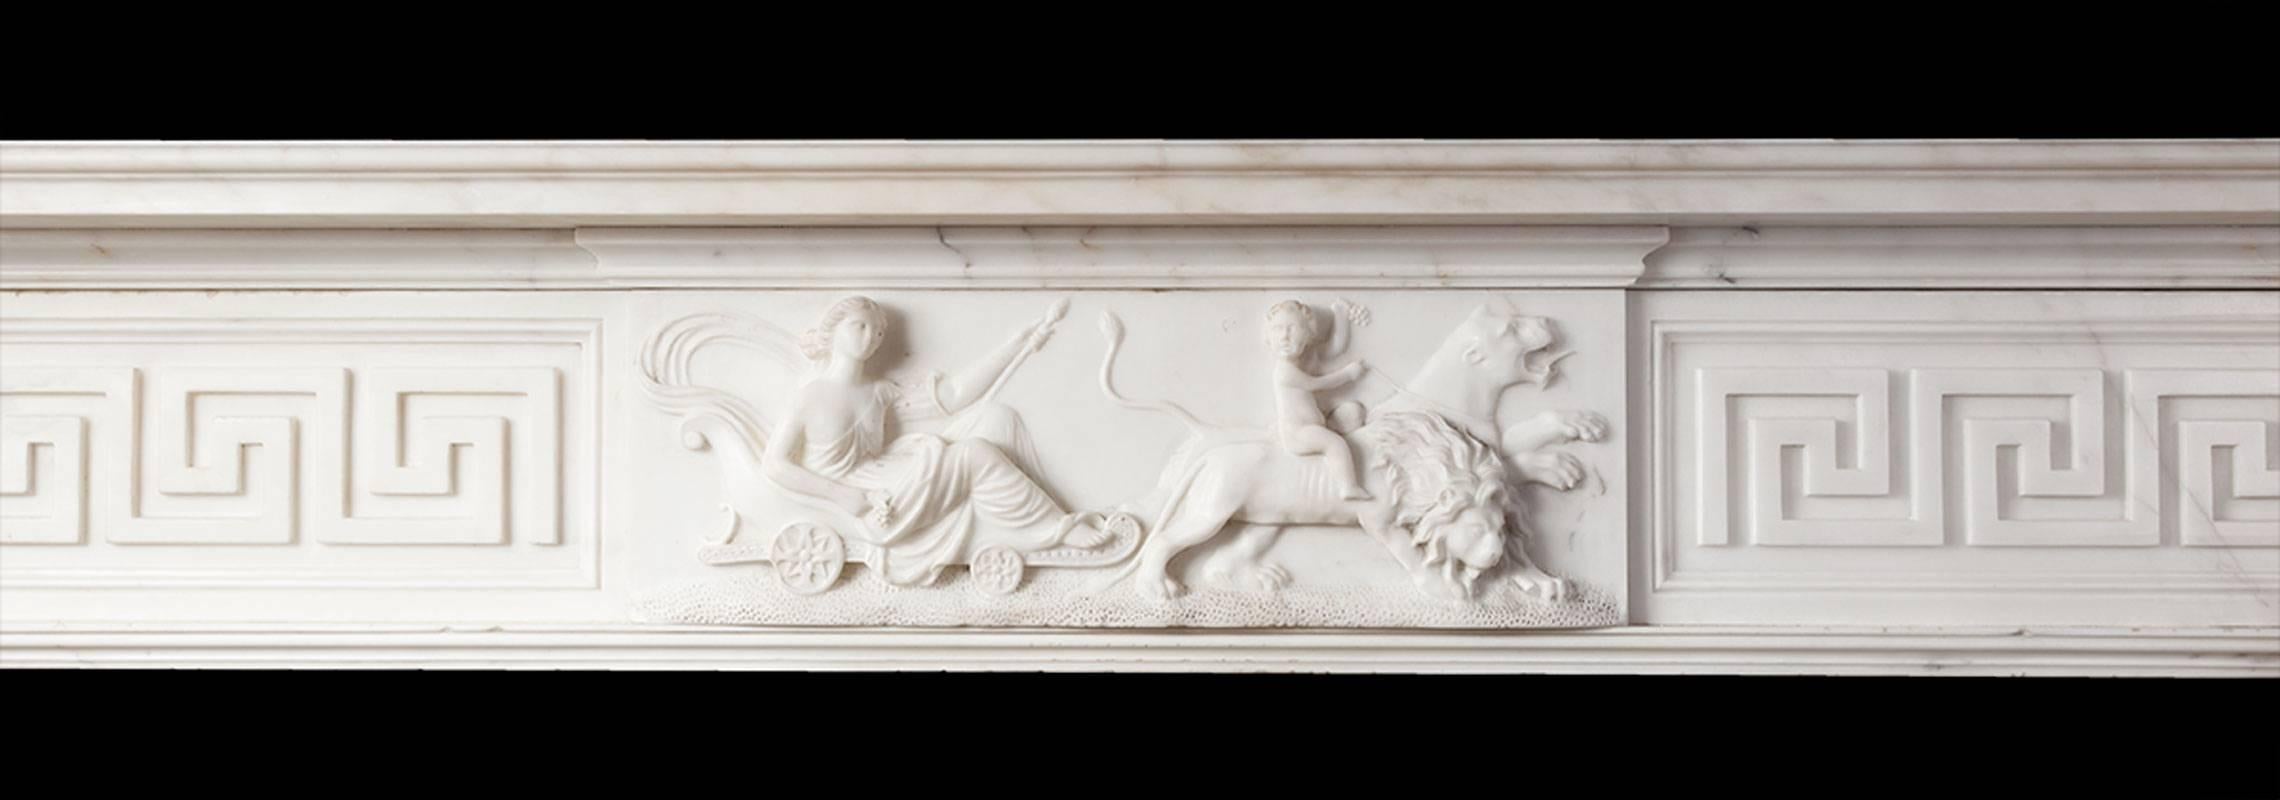 Regency statuary marble fireplace of large scale and great quality. With full free standing Sienna marble columns, capped with egg and dart Doric capitals. In the centre of the frieze is a beautifully carved tablet, depicting Venus on a chariot